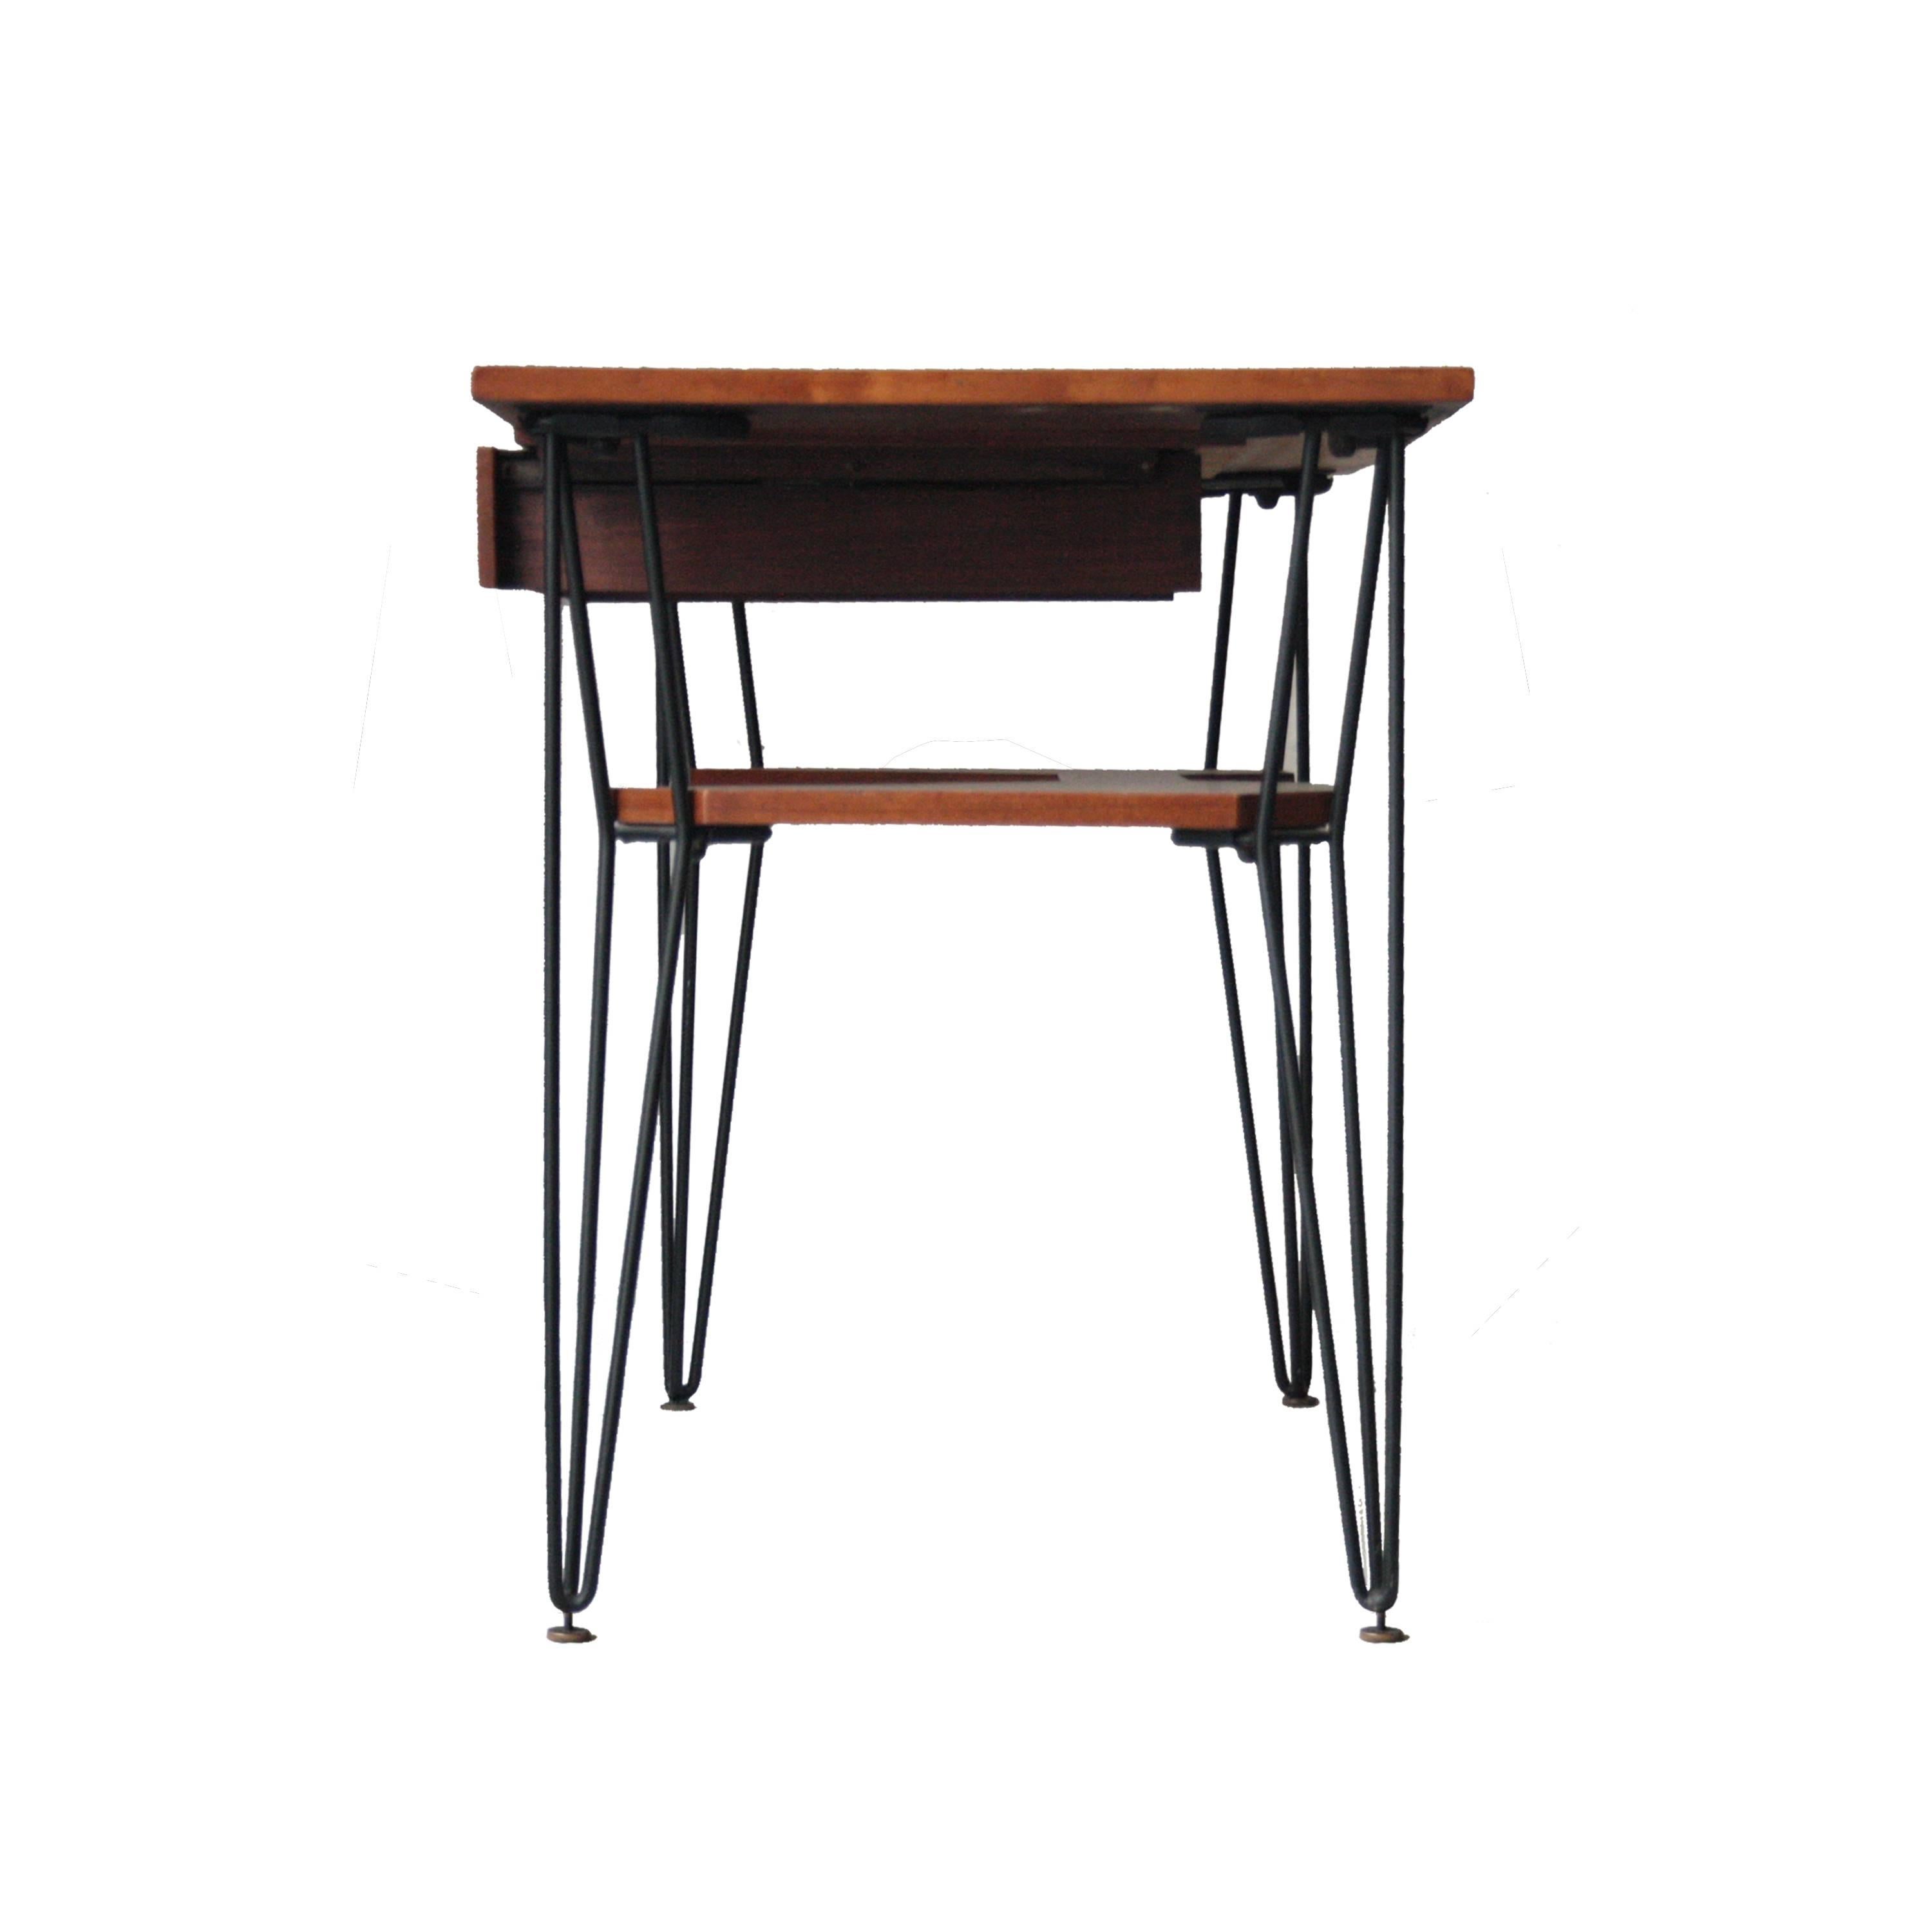 Lacquered Rosewood Wooden Desk with Metallic Legs, Italy, 1950